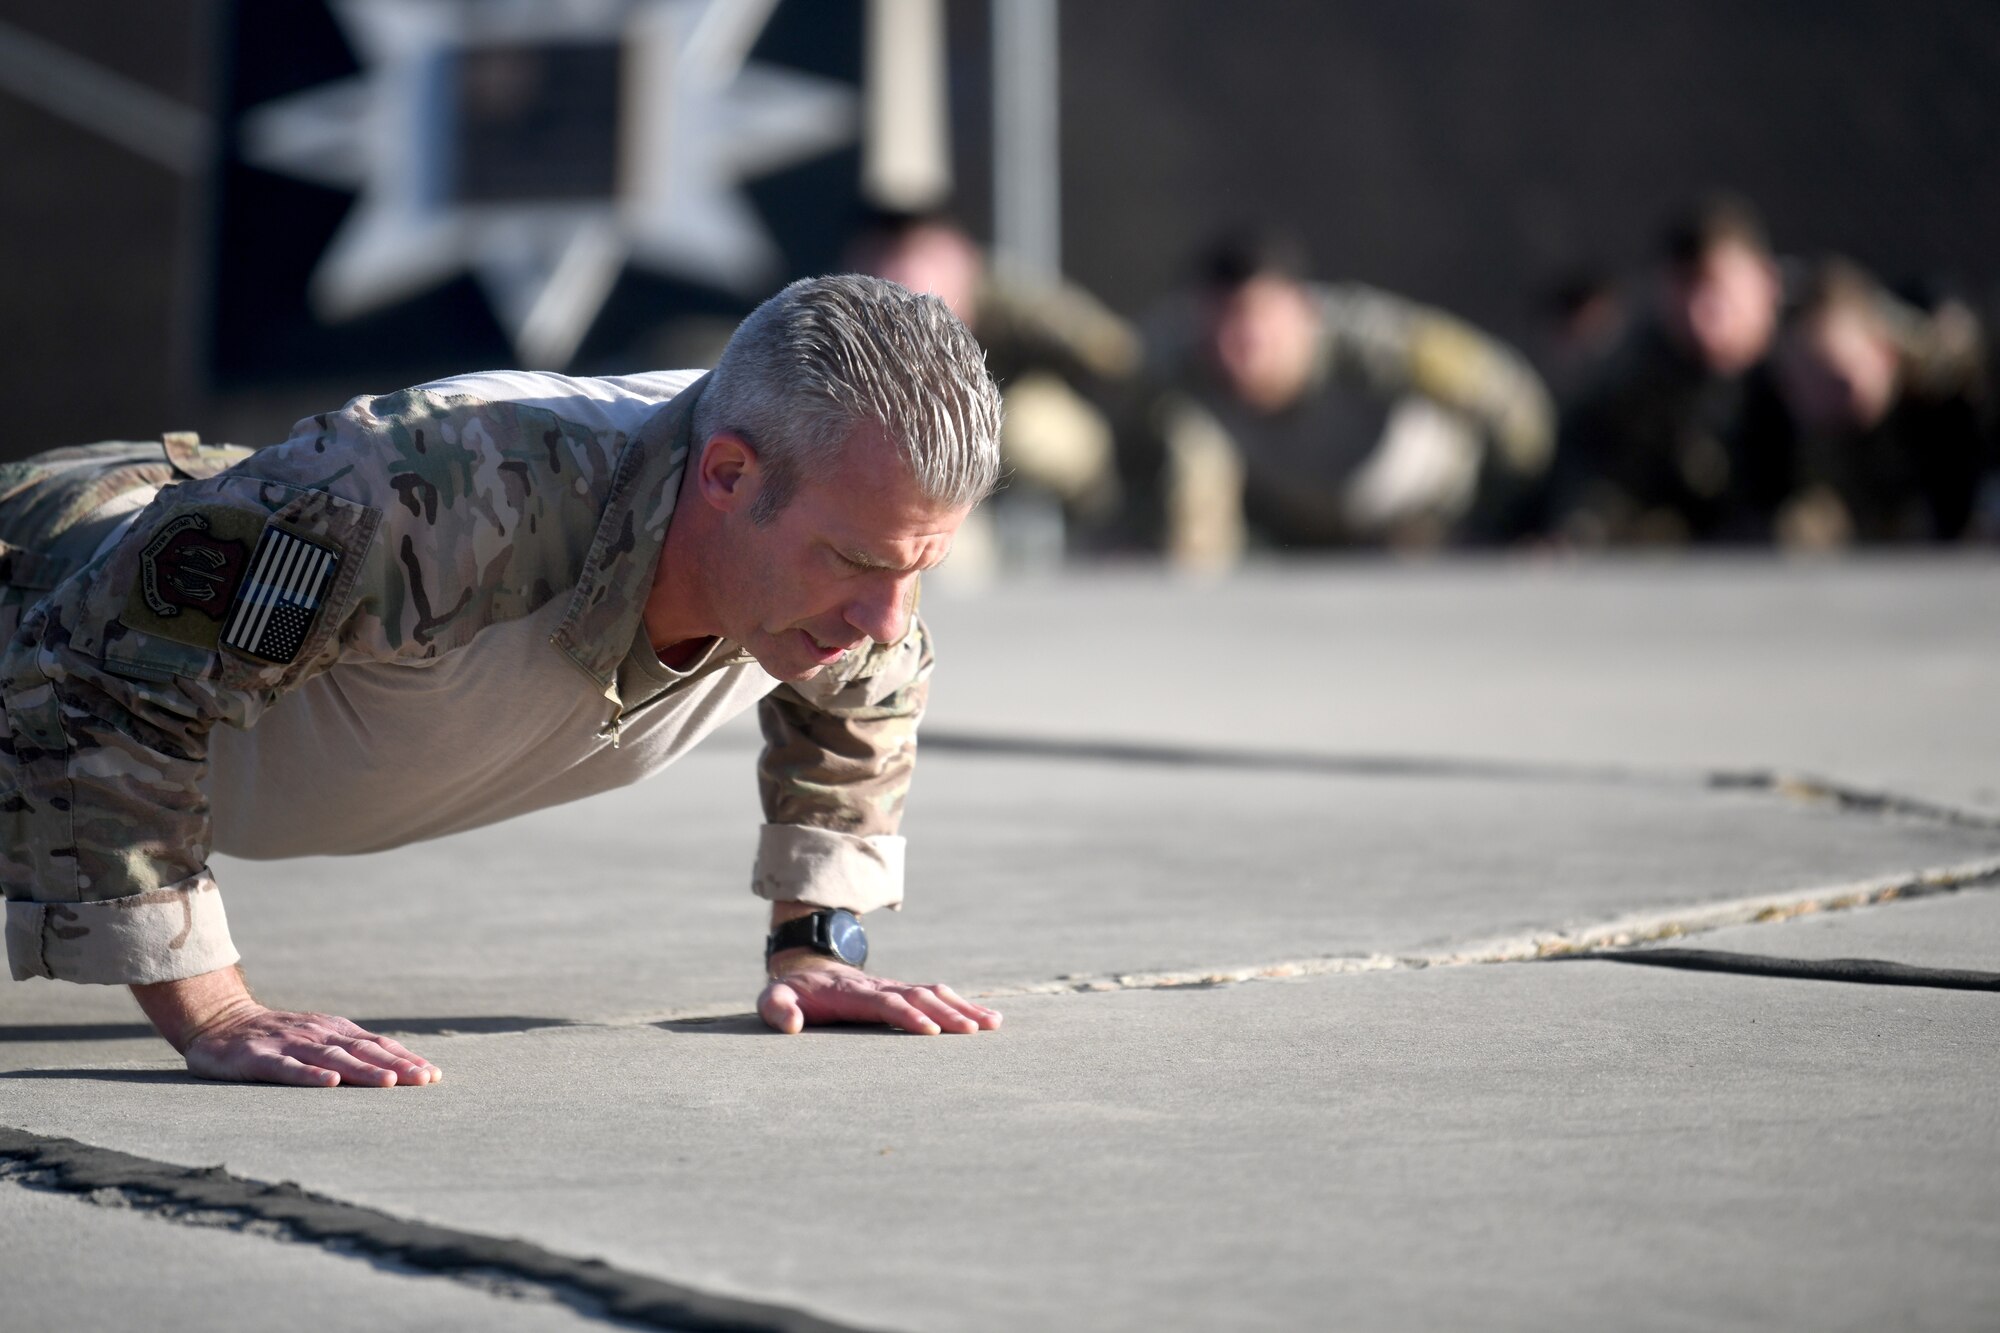 U.S. Air Force Chief Master Sgt. Todd Popovic, Special Warfare Training Wing command chief, leads participants in Memorial pushups during a rededication ceremony in honor of U.S. Air Force Lt. Col. William Schroeder and U.S. Air Force Staff Sgt. Scott Sather at the SWTW training compound Joint Base San Antonio, Chapman Training Annex, Apr. 8, 2022.  The wing and echelon units hosted a two and one-half mile ruck march followed by Memorial pushups and the unveiling of refitted memorials in coordination with Gold Star families (U.S. Air Force photo by Brian Boisvert)